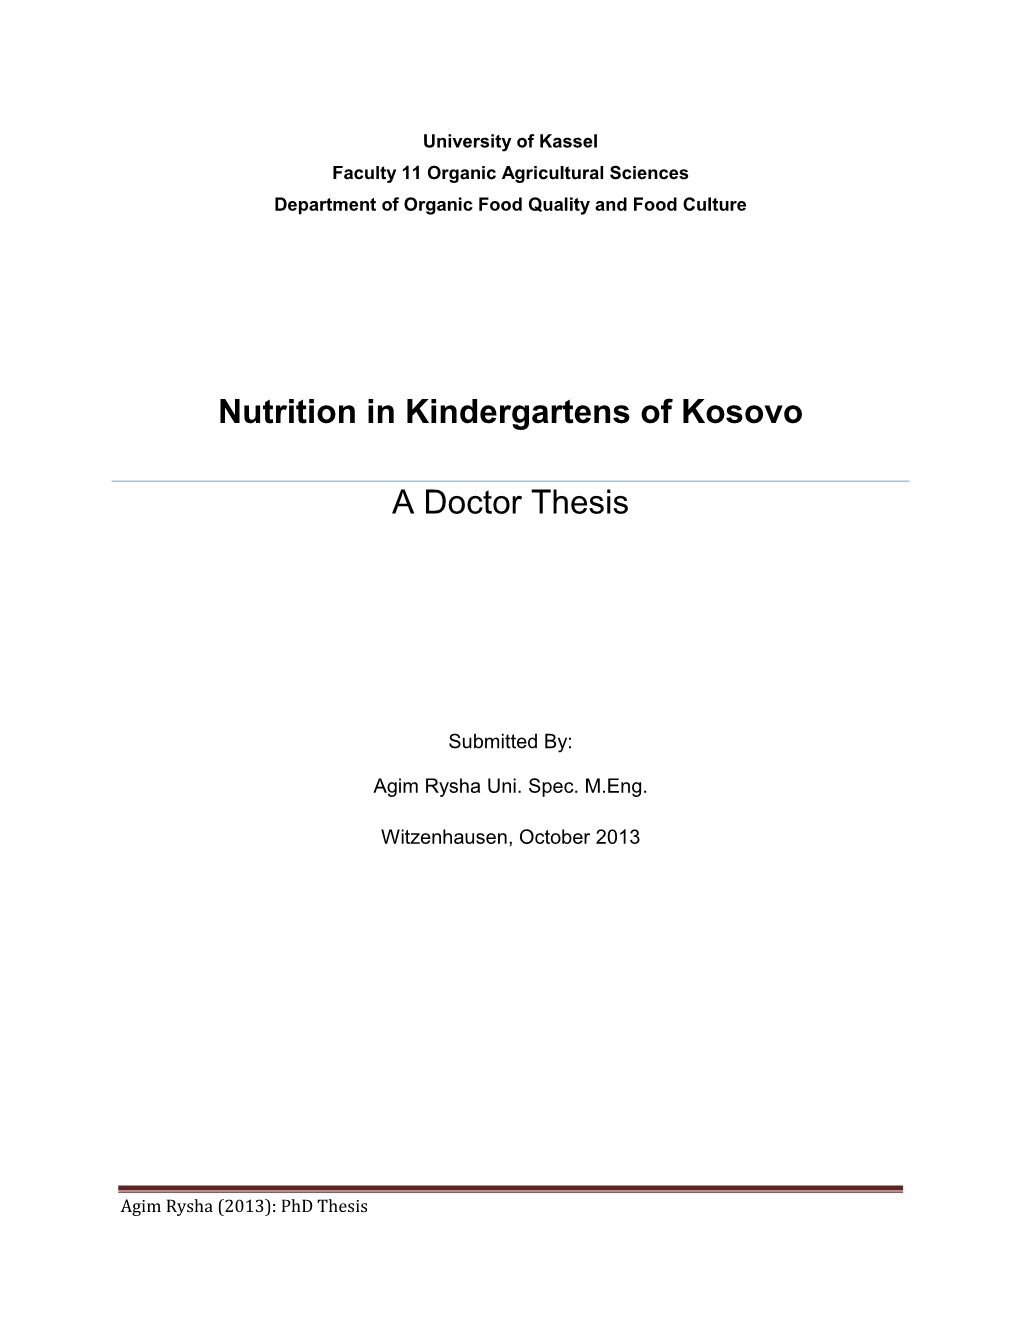 Nutrition in Kindergartens of Kosovo a Doctor Thesis